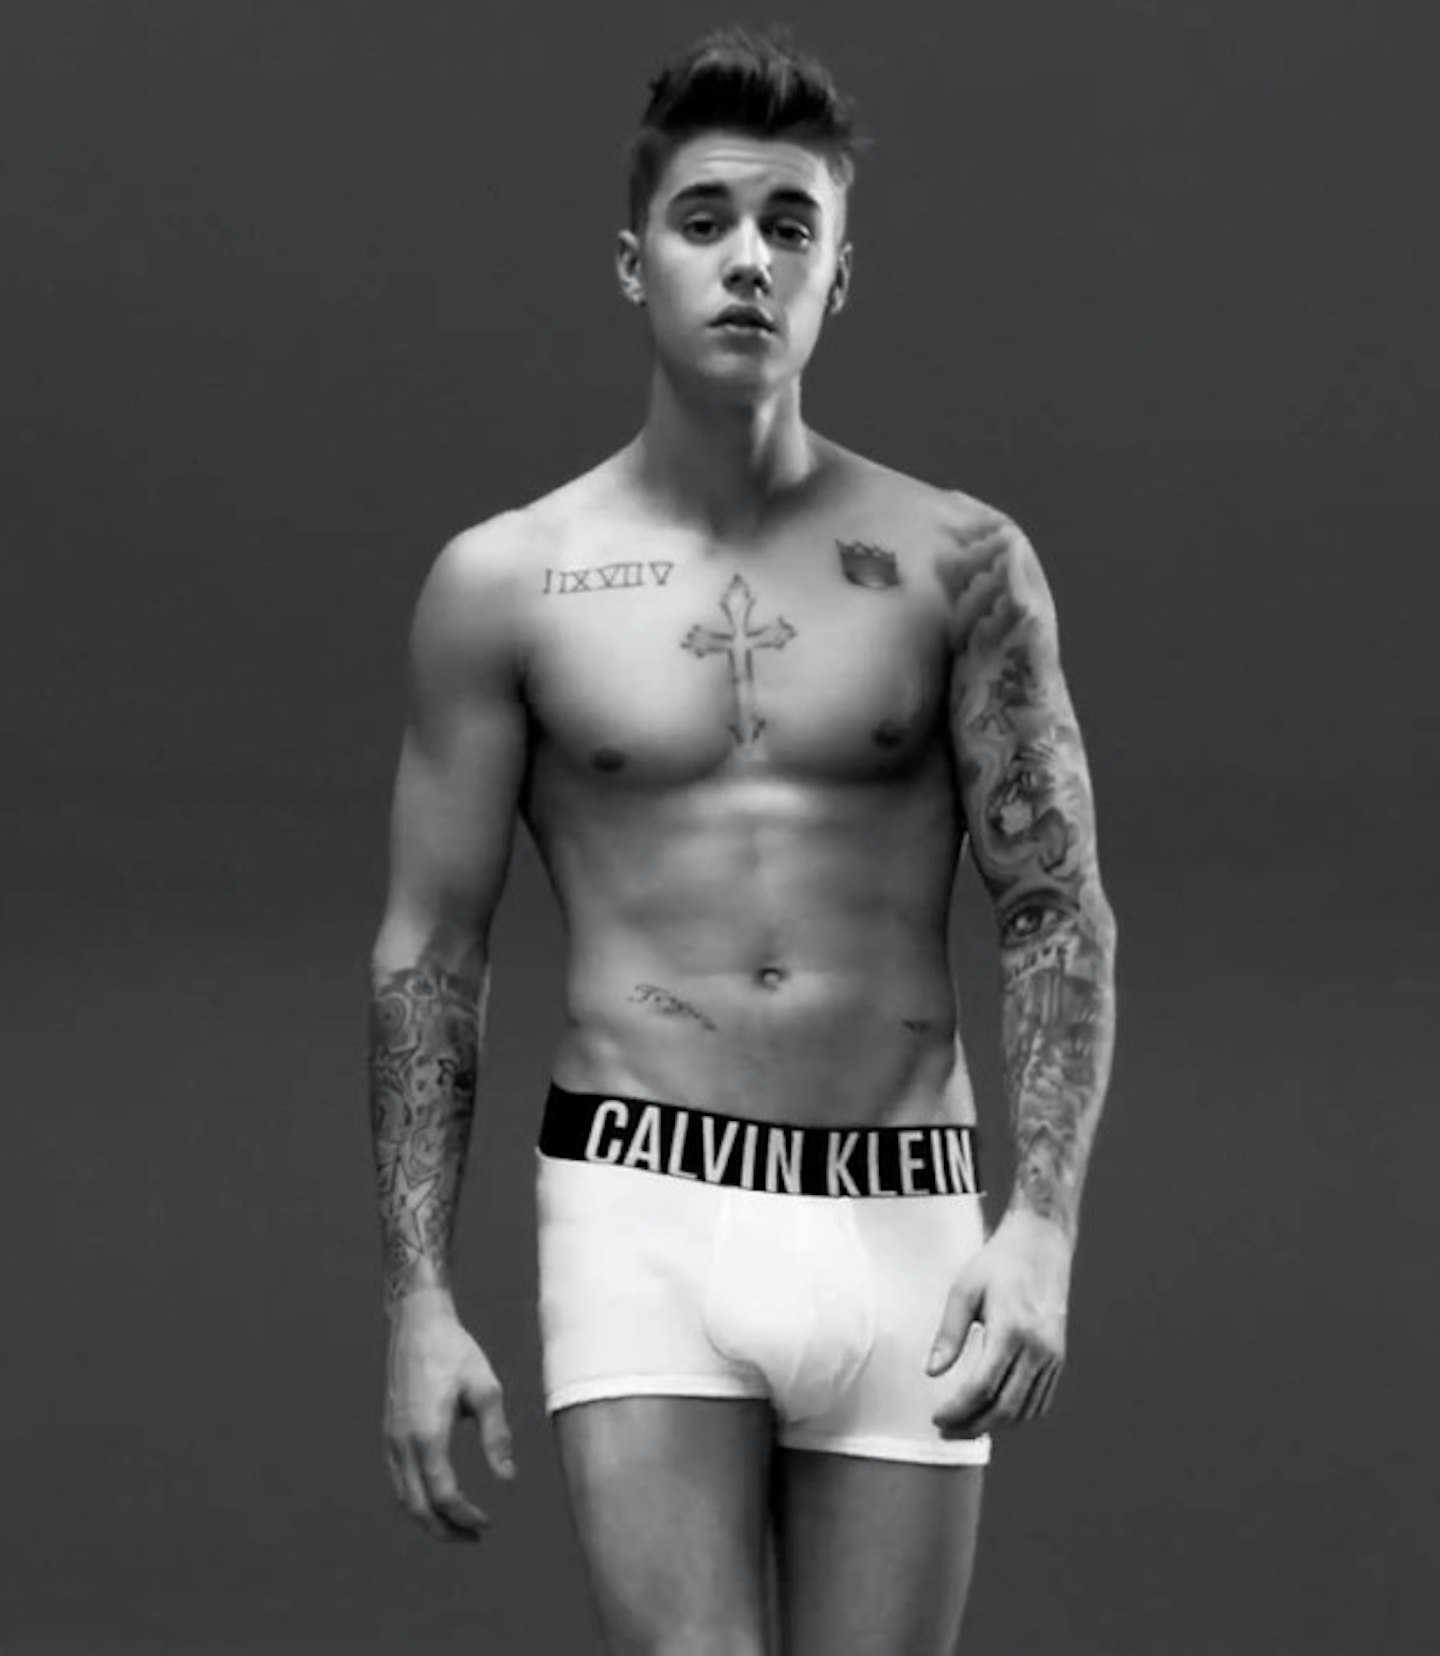 Justin Bieber's 'unretouched' Calvin Klein picture suggests he's